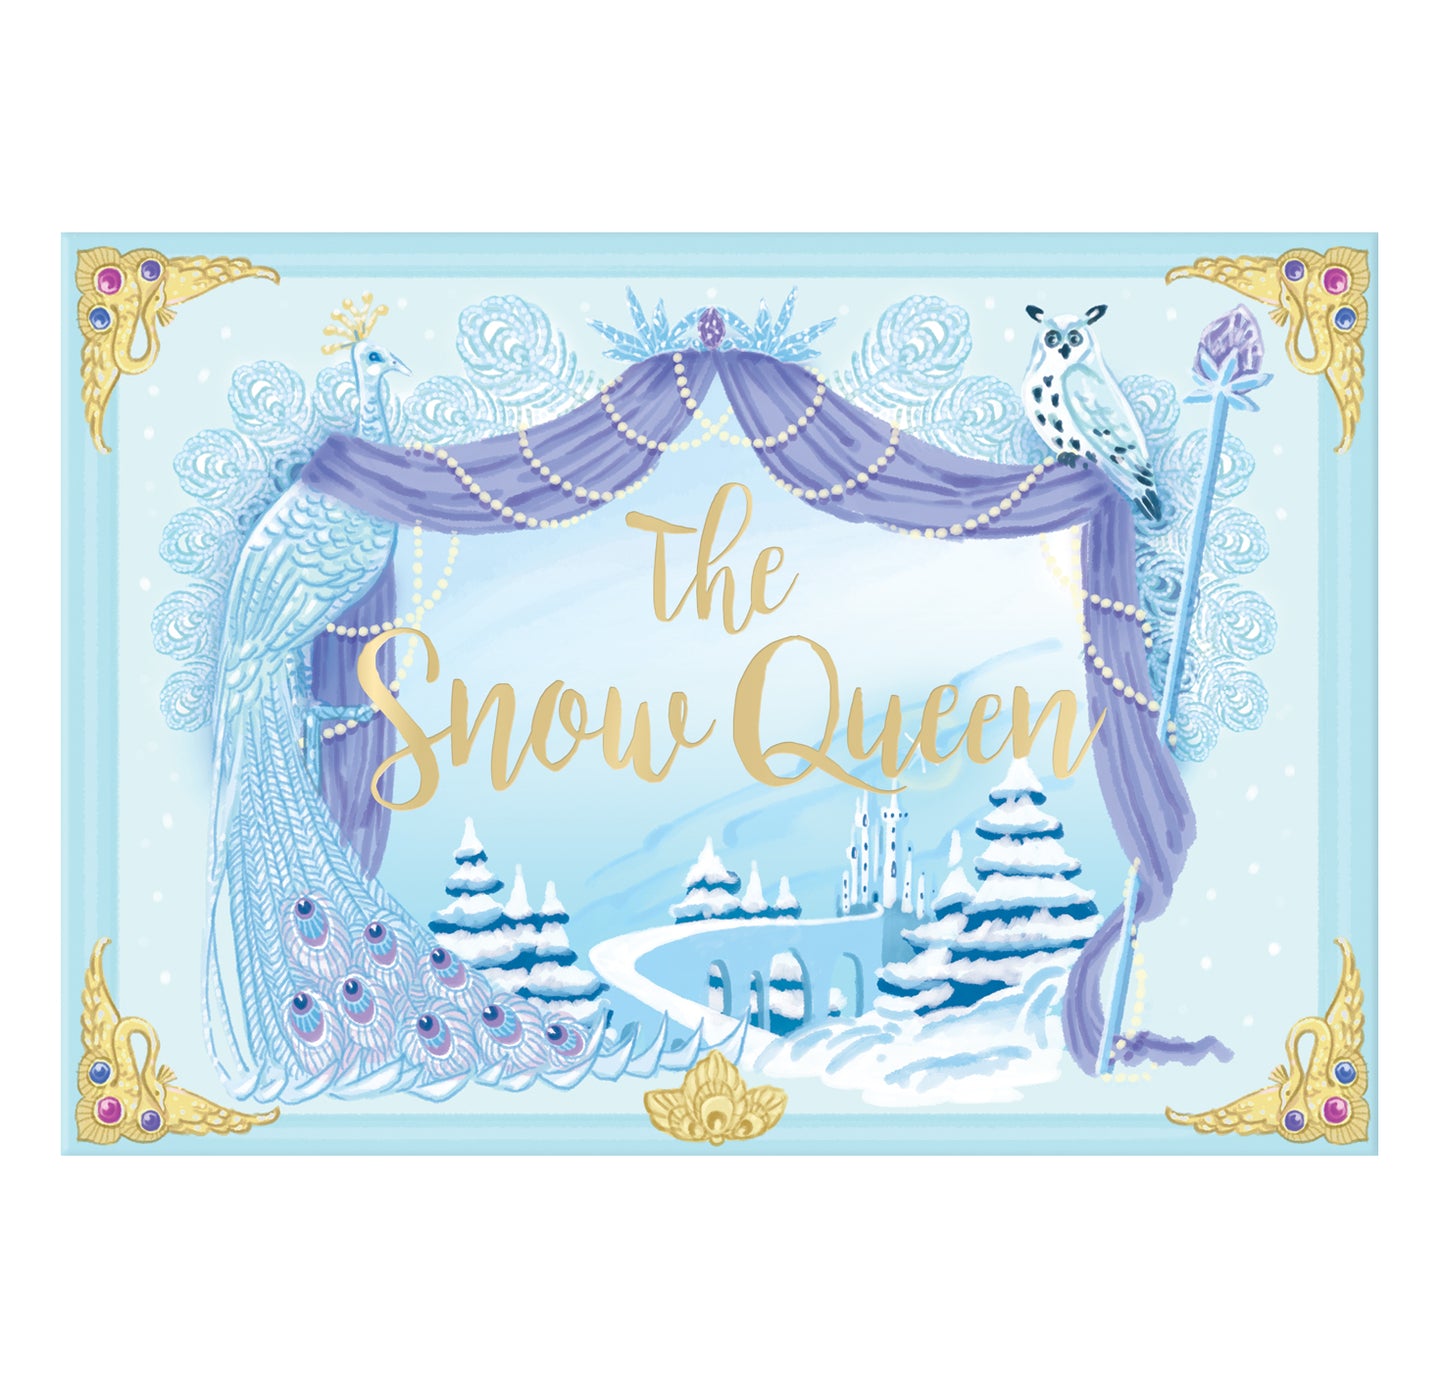 The Snow Queen Music Box Card Novelty Dancing Musical Christmas Card